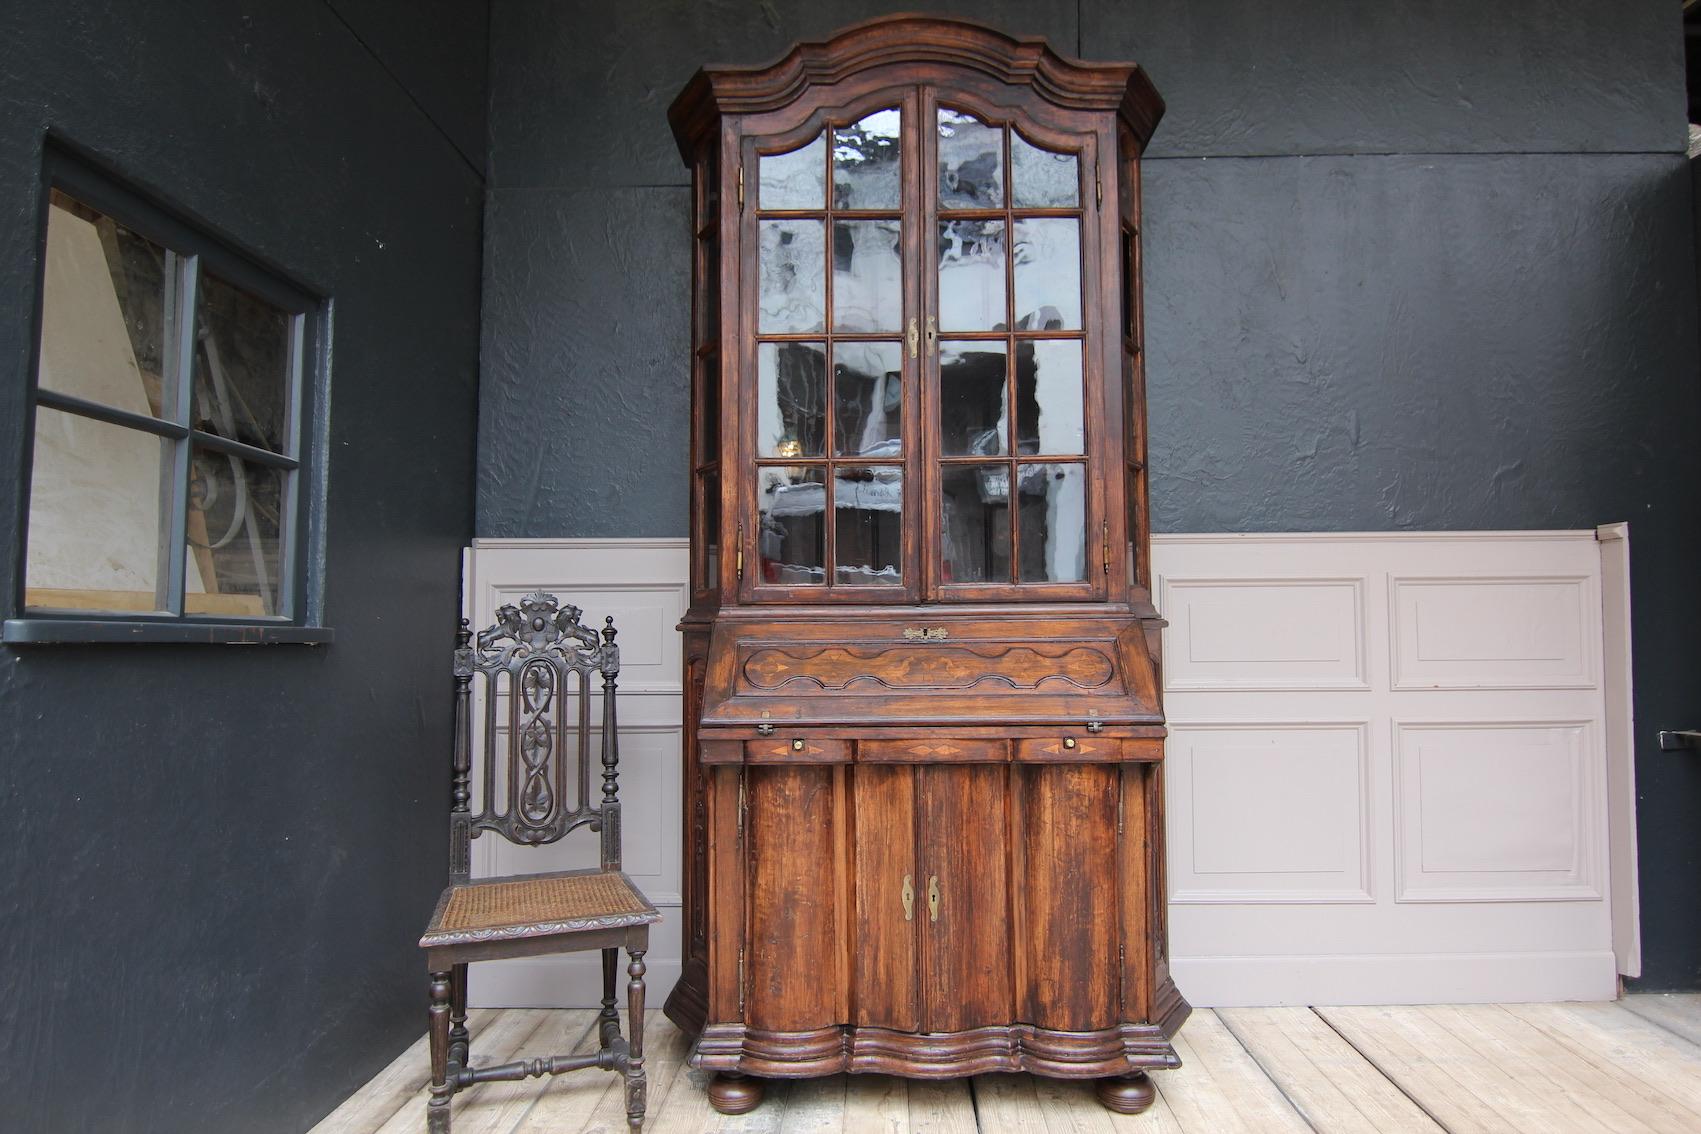 Large German Provincial Baroque secretary a Deux corps from the Eifel region. Probably a one-off production from the 19th century.
Solidly handcrafted from different types of wood (including maple and oak) with inlay work and carving.
Standing on 4